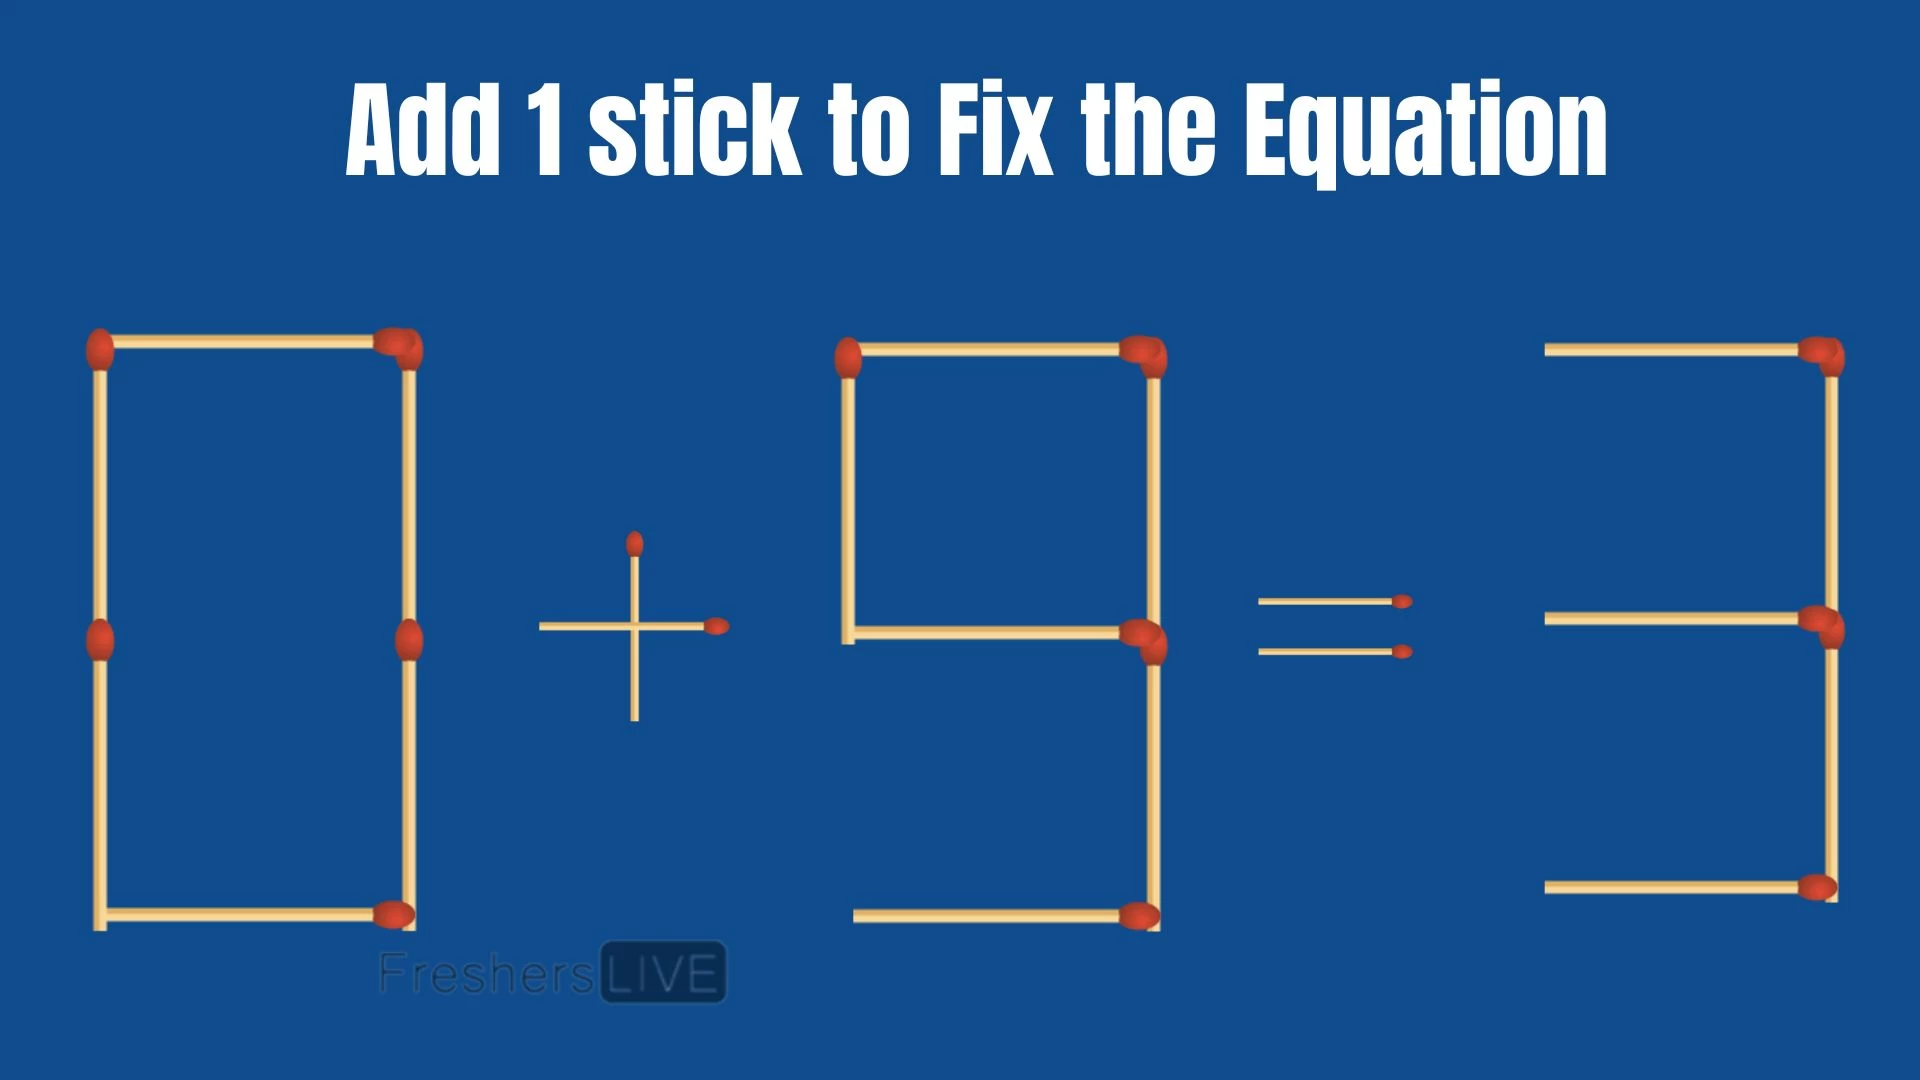 Solve the Puzzle to Transform 0+9=3 by Adding 1 Matchstick to Correct the Equation